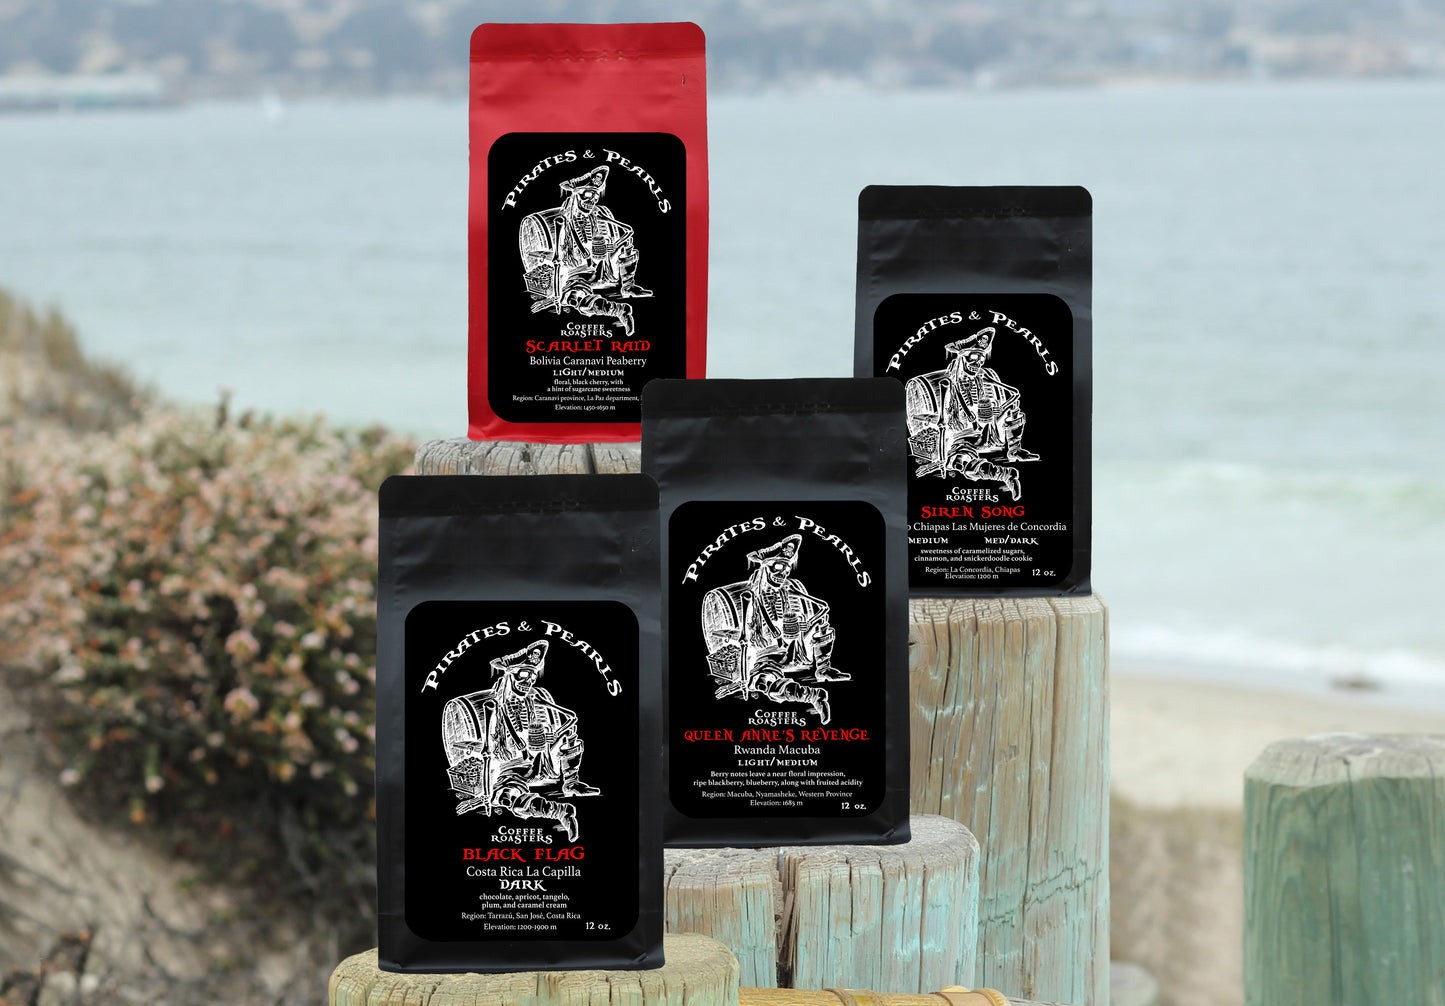 pirates-and-pearls-coffee-subscription-four-baggs-per-month